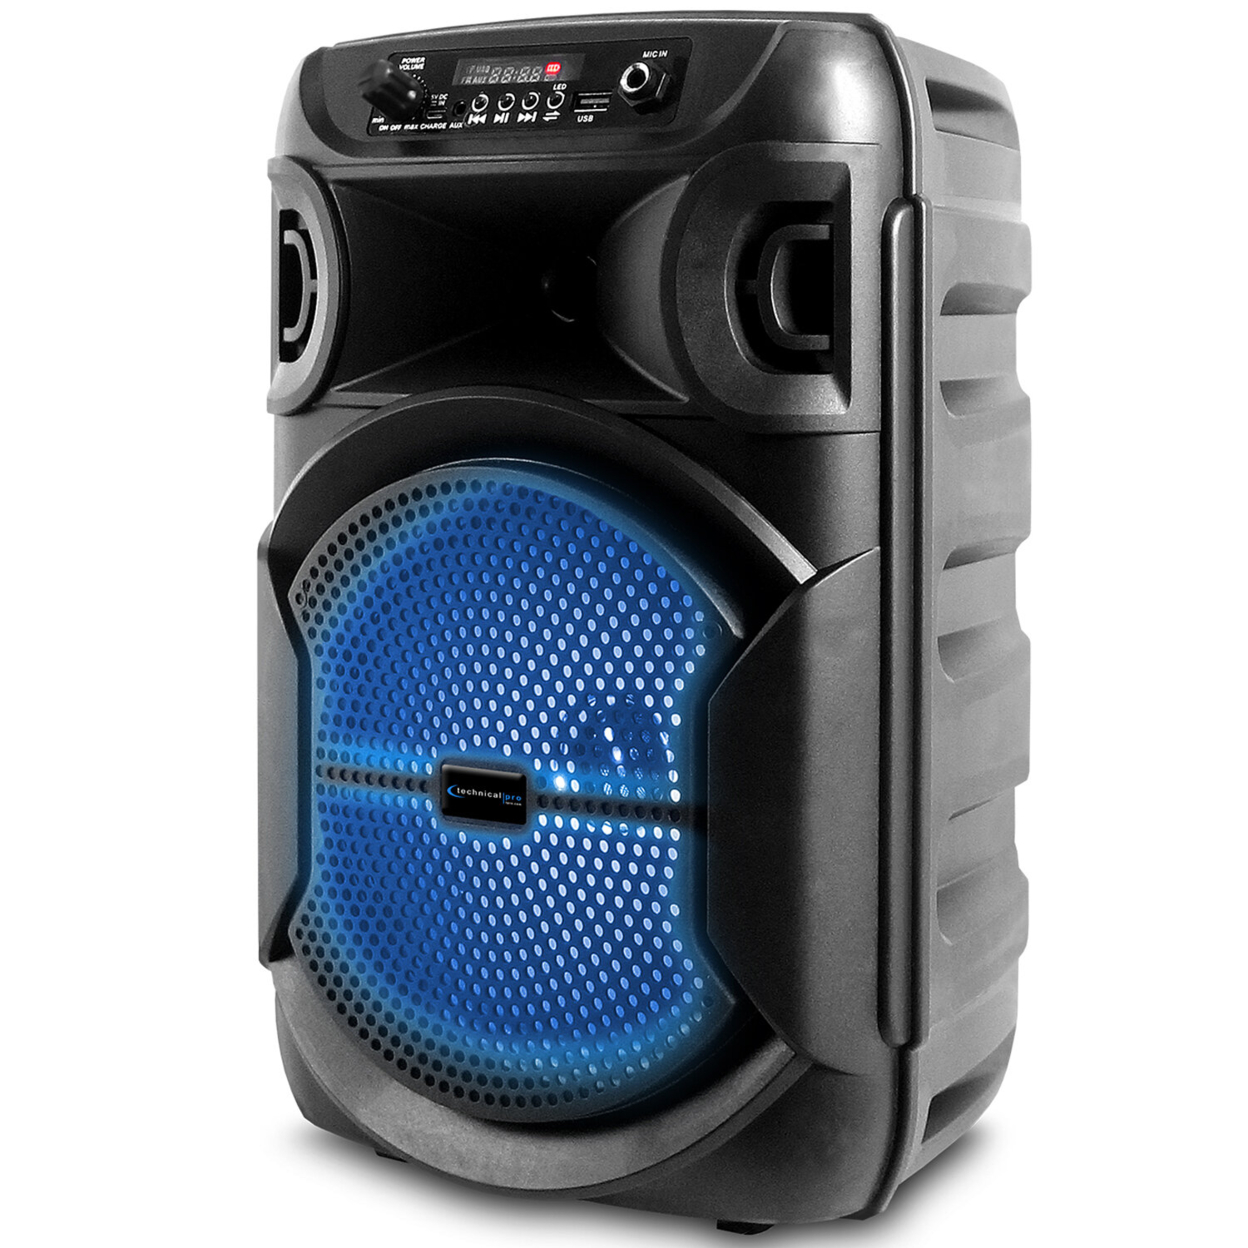 2 Set Technical Pro 8 Inch Portable 1000 watts Bluetooth Speaker w/ Woofer and Tweeter Party PA LED Speaker w/ - image 2 of 7